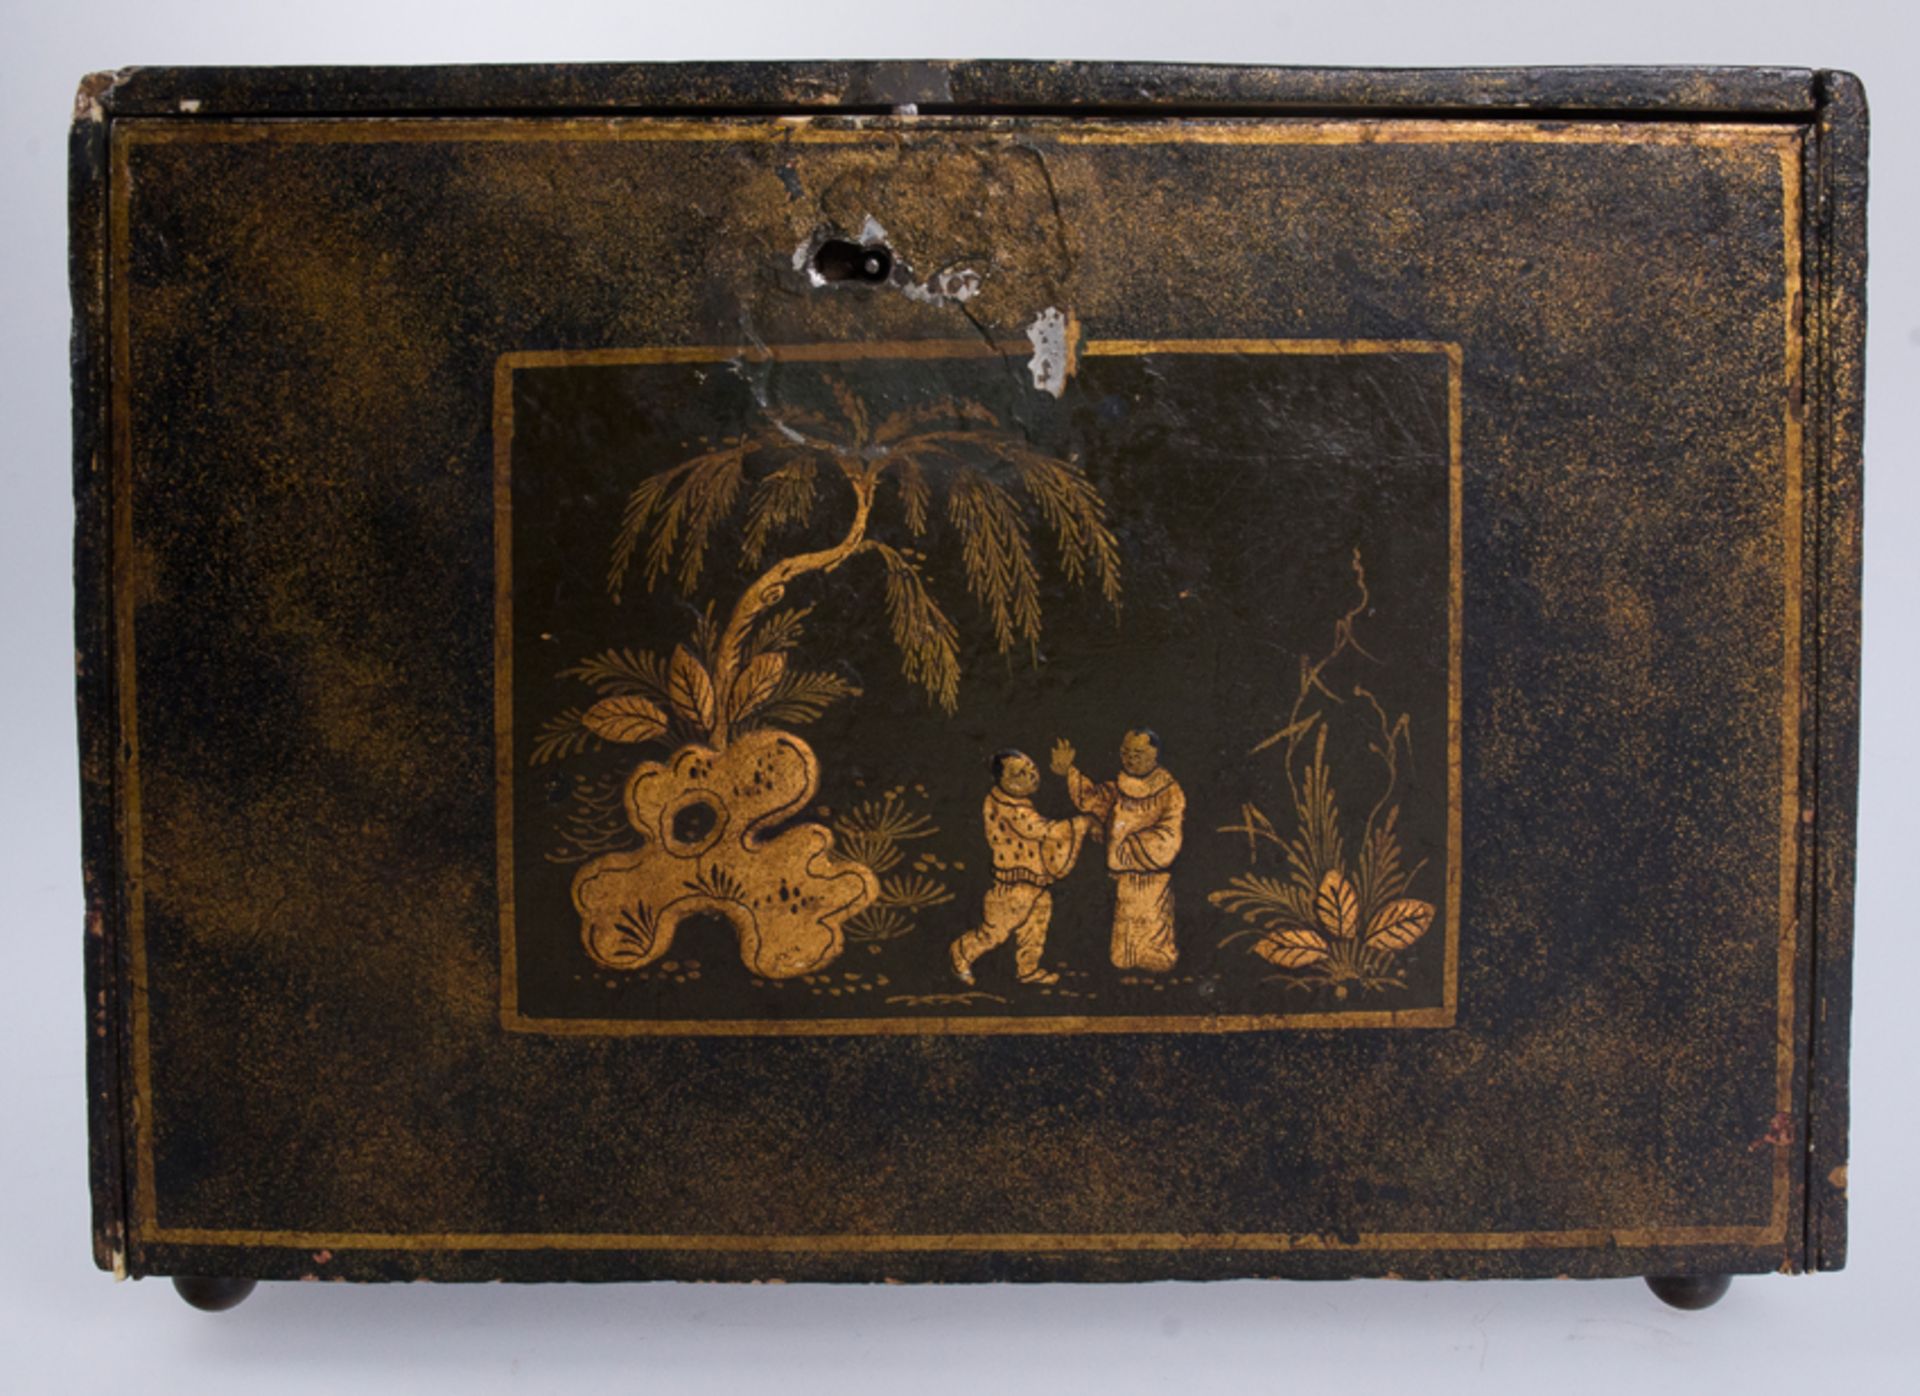 Gilded, lacquered wooden chest with engraved and gilded ivory interior. Indo-Portuguese. 18th centur - Image 7 of 10